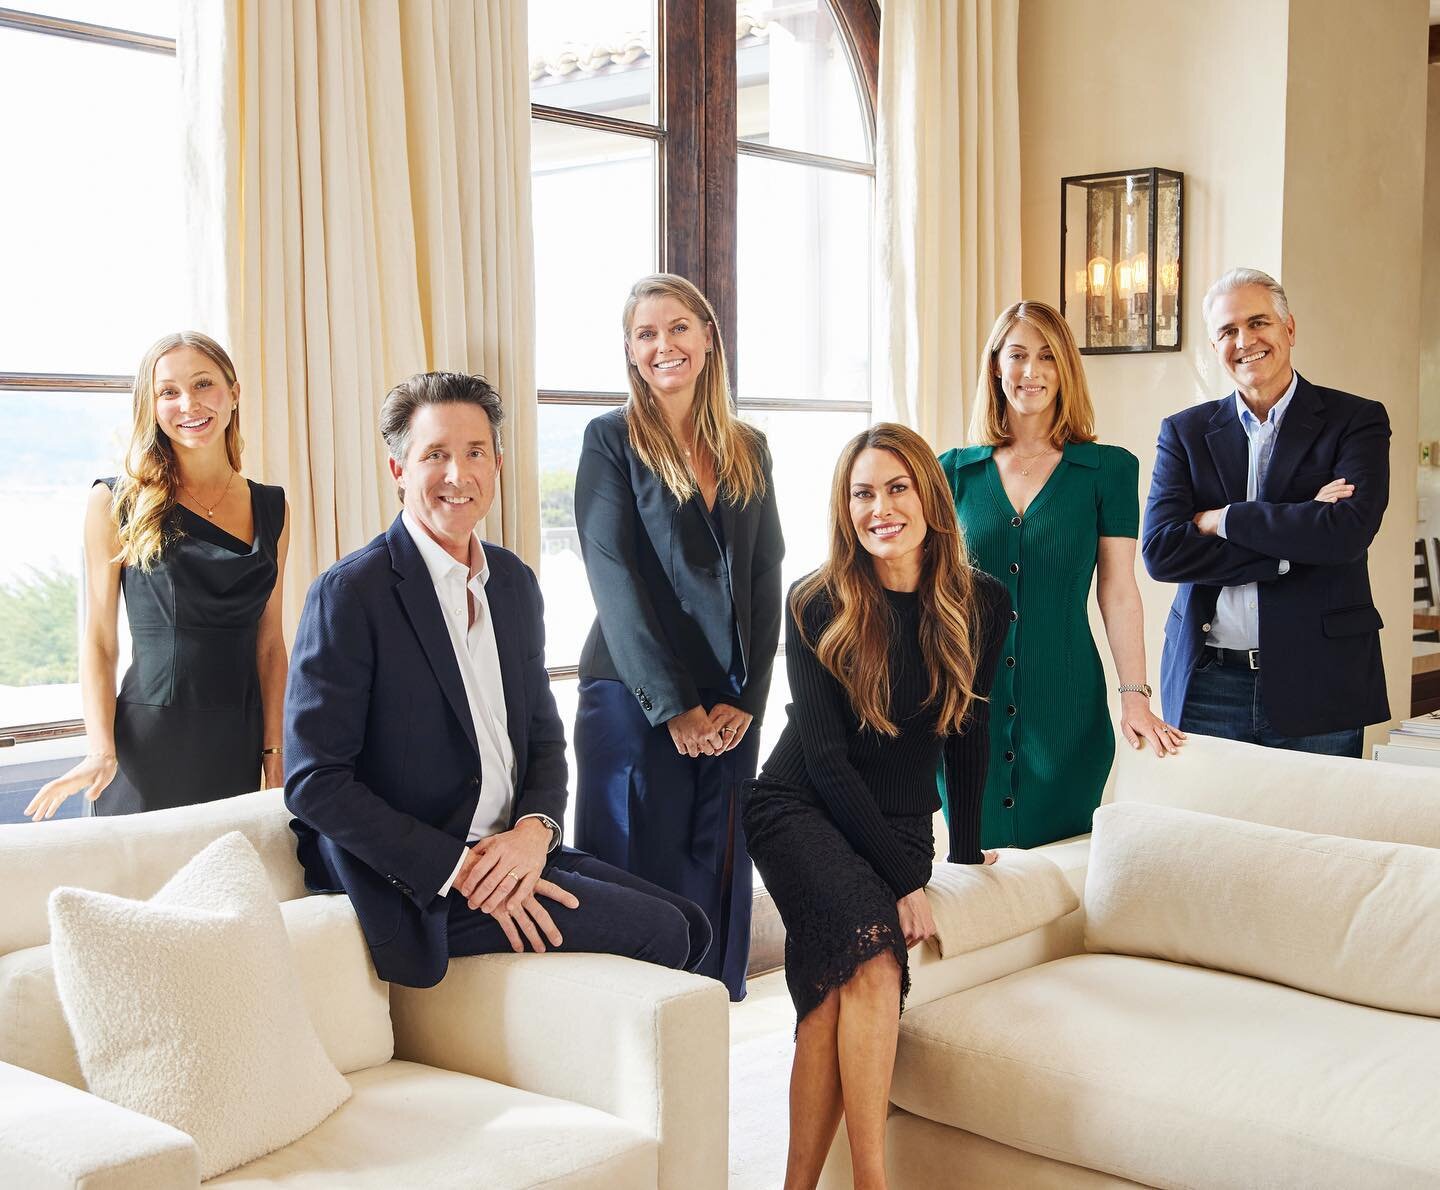 The Applegarth+Warrin team is ranked as the #1 Team at Golden Gate Sotheby&rsquo;s International Realty among San Francisco and Marin agents. With over $2 billion in total sales and $120 million sold in 2022 alone, the team has unparalleled knowledge